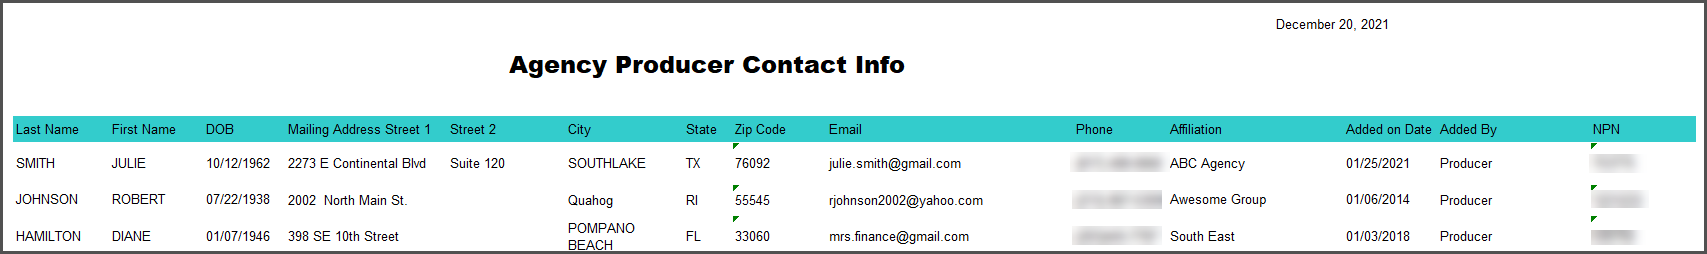 Agency_Producer_contact_Info_report_example.png